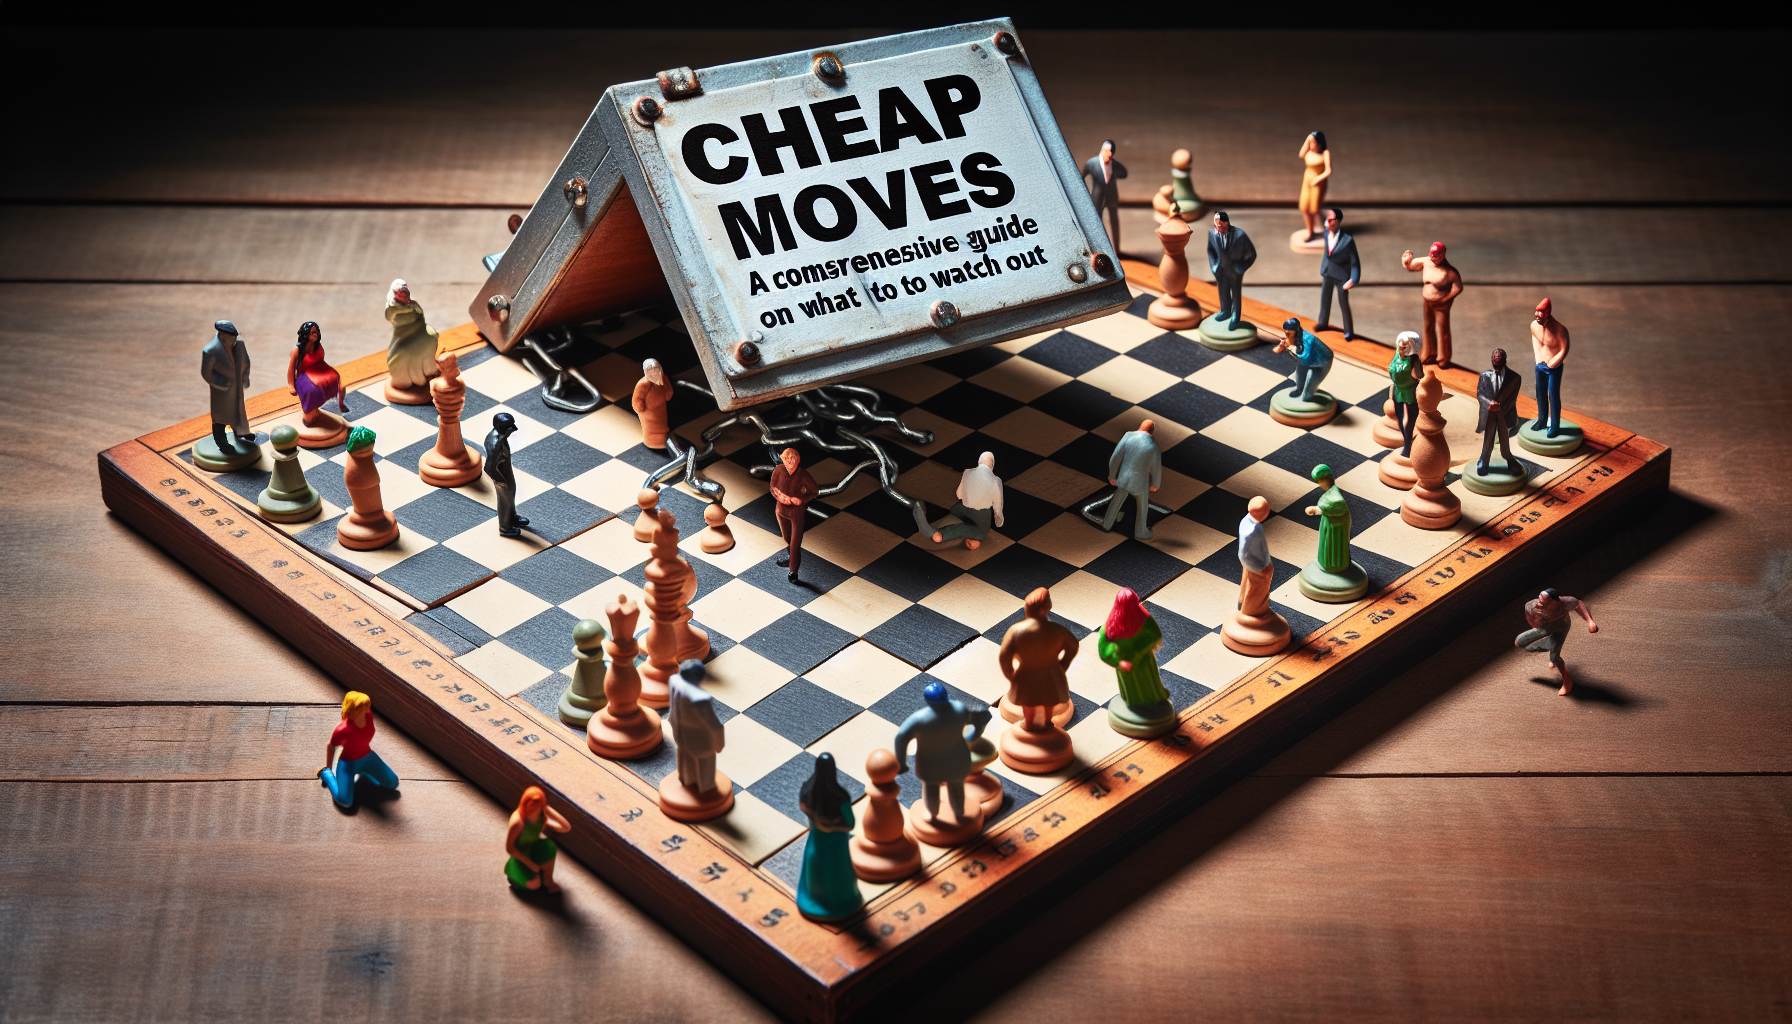 Avoid the cheapest move - caveat emptor